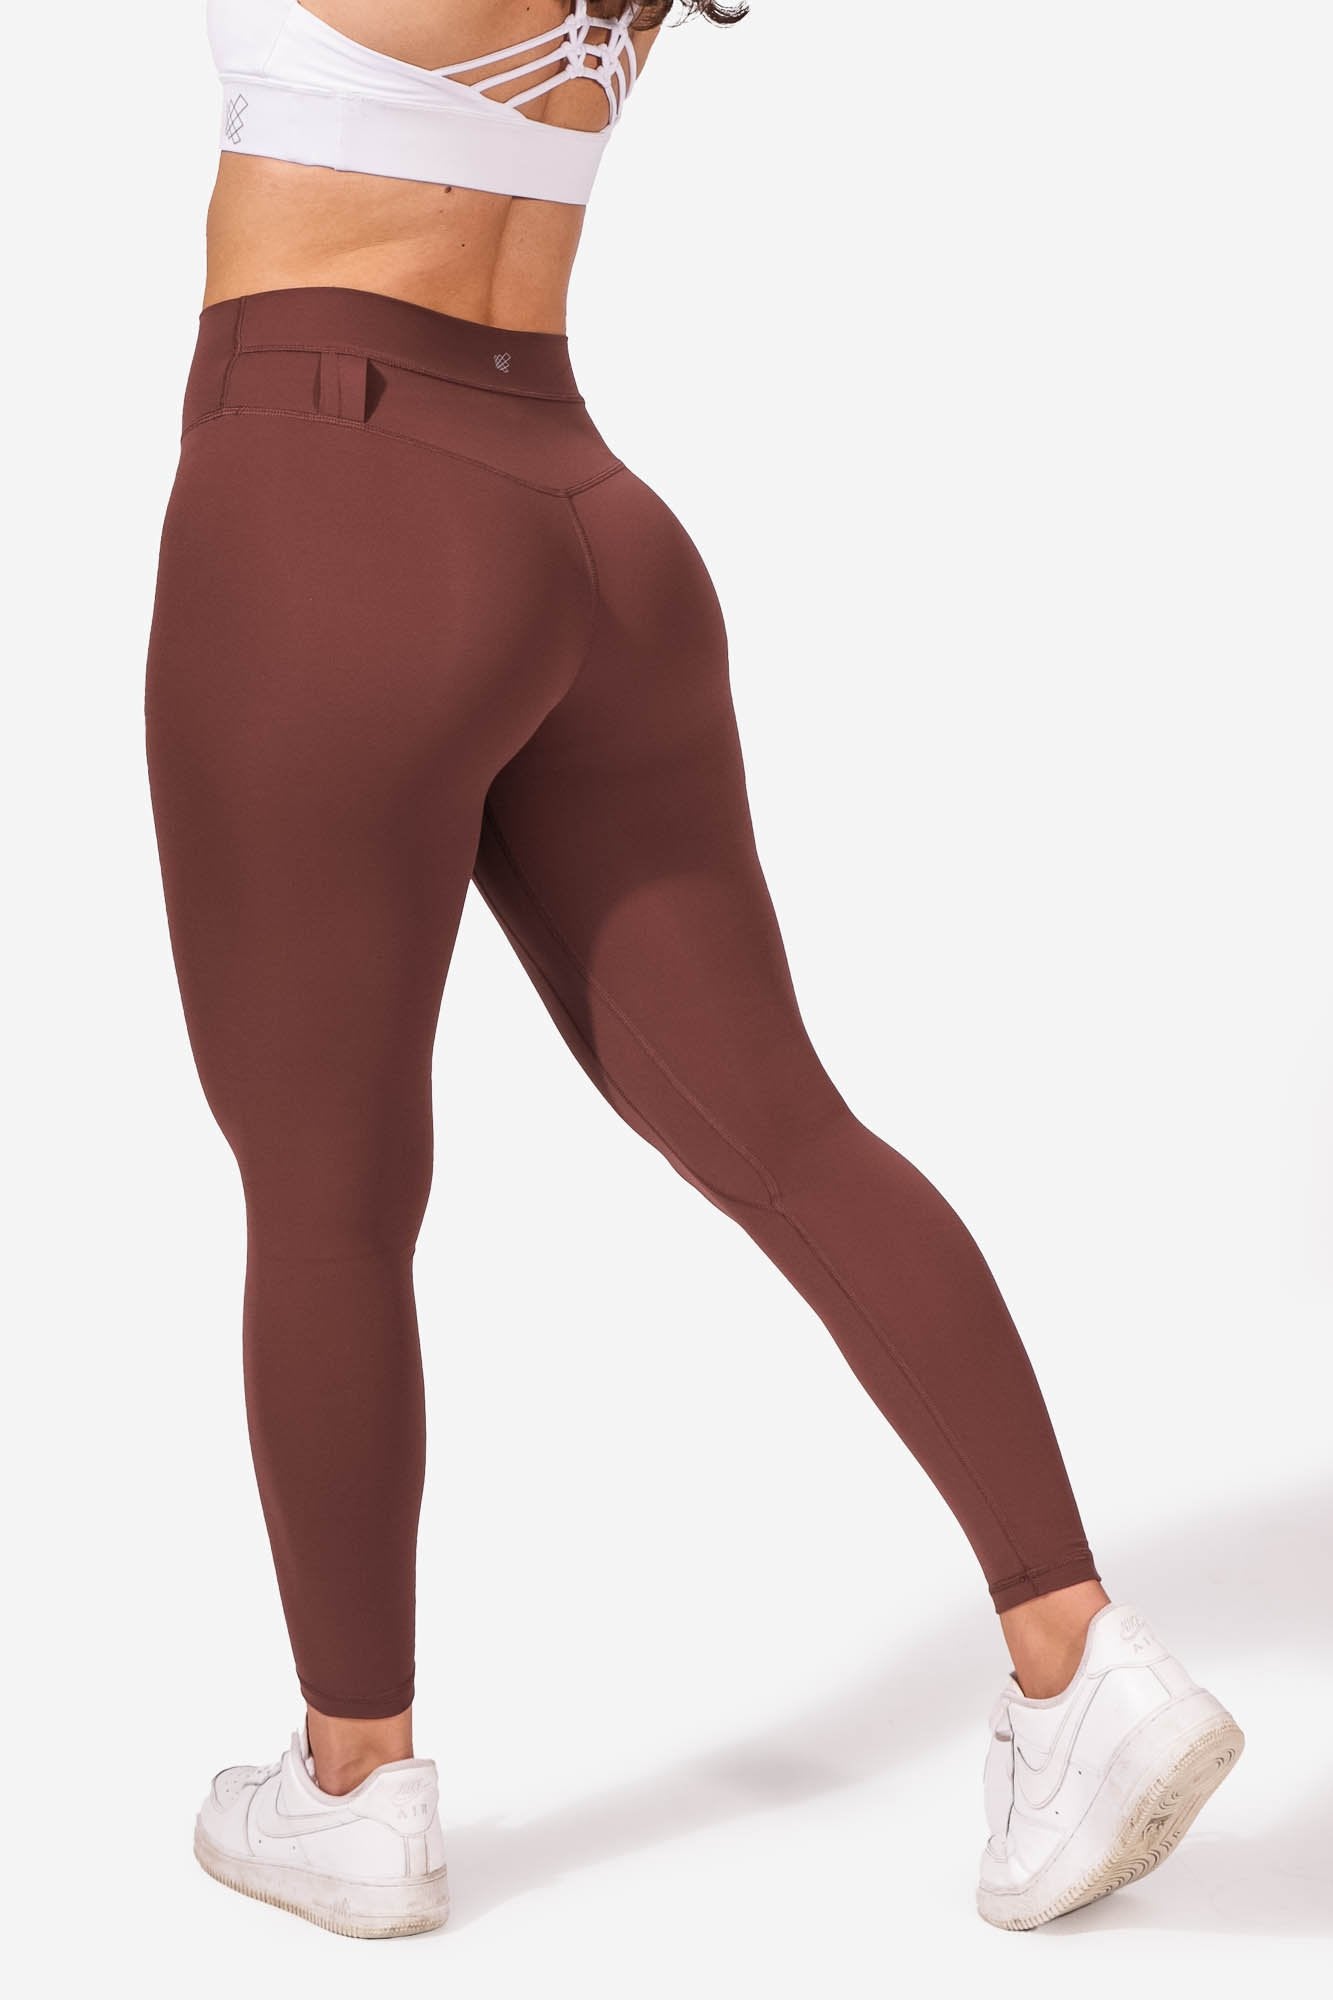 Booty Sculpted Classic Red Shaping Leggings  Women's Training Black Yoga  Pants (XXS) at  Women's Clothing store